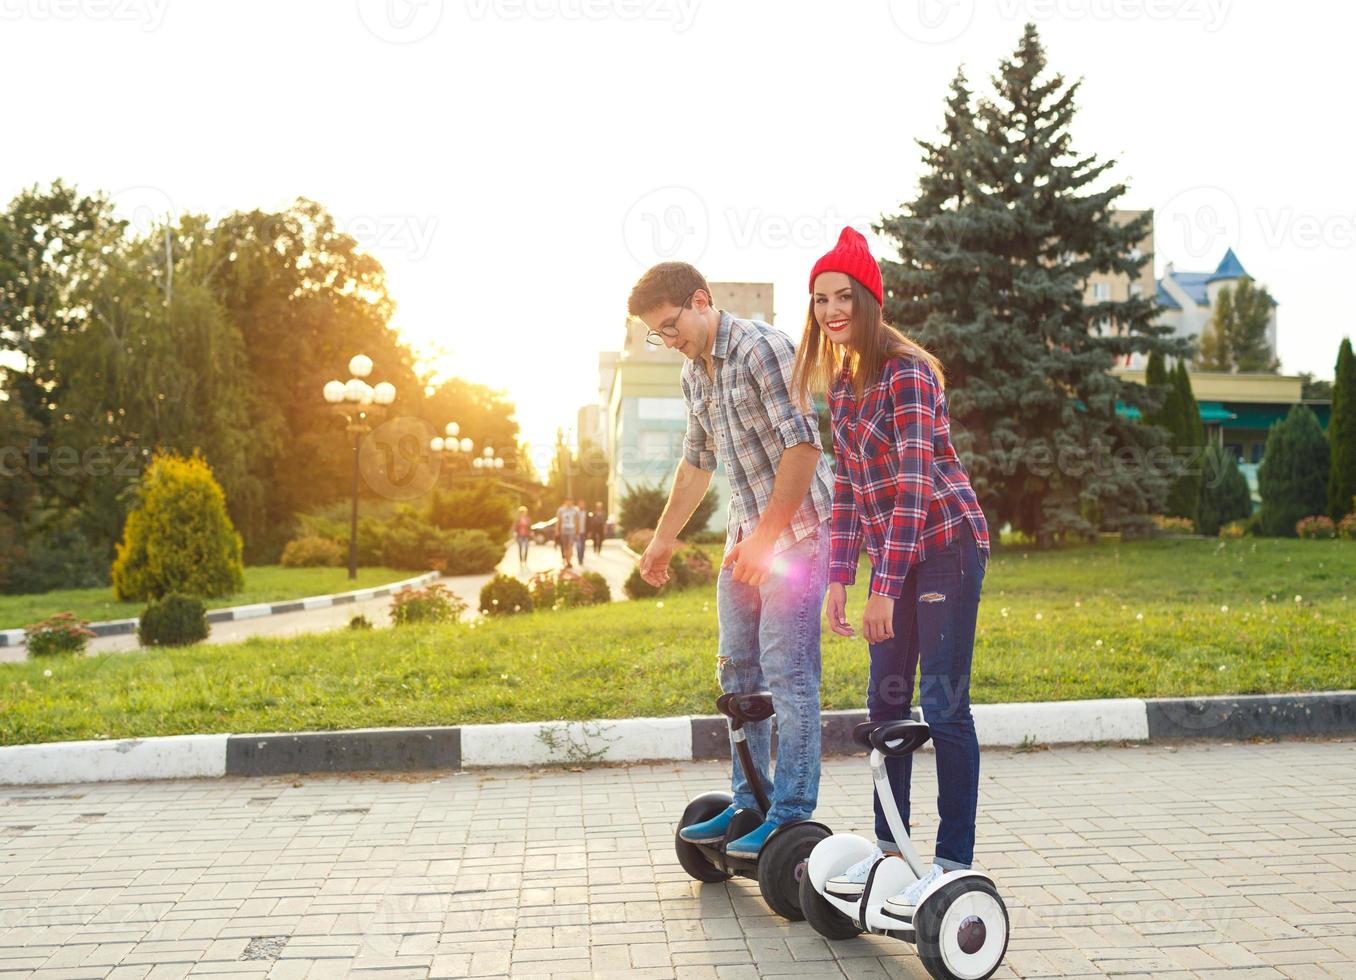 A young couple riding hoverboard - electrical scooter, personal eco transport, gyro scooter, smart balance wheel photo